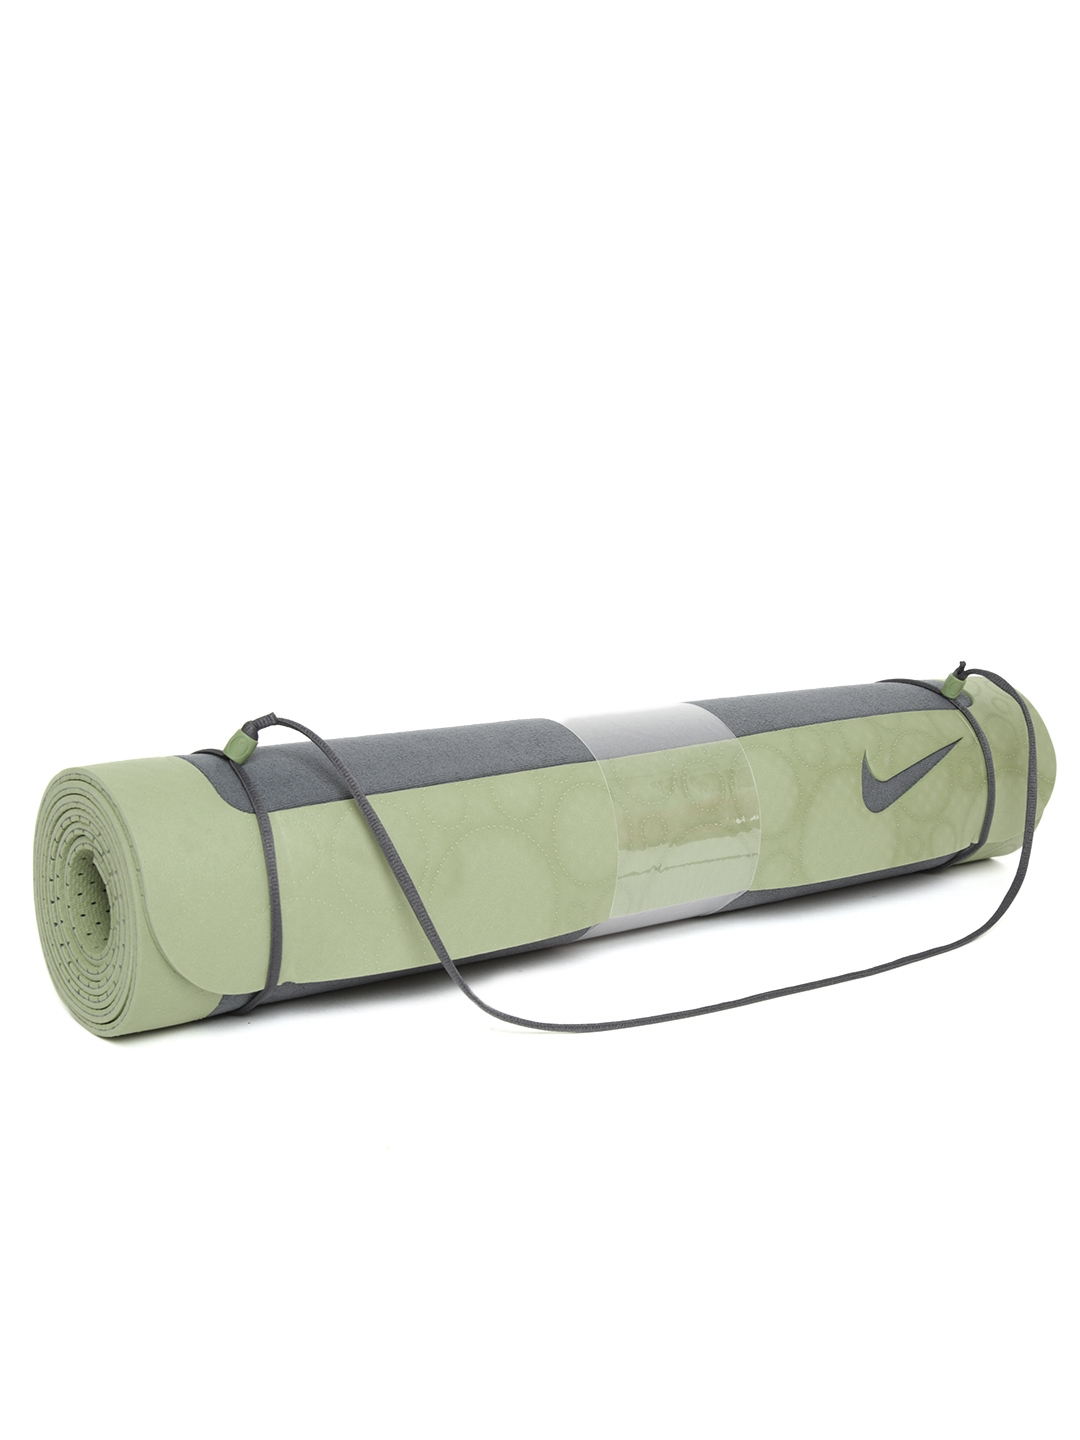 Buy Nike Unisex Black & Olive Green 5 Yoga Mat - Sports Accessories for Unisex 2424907 | Myntra